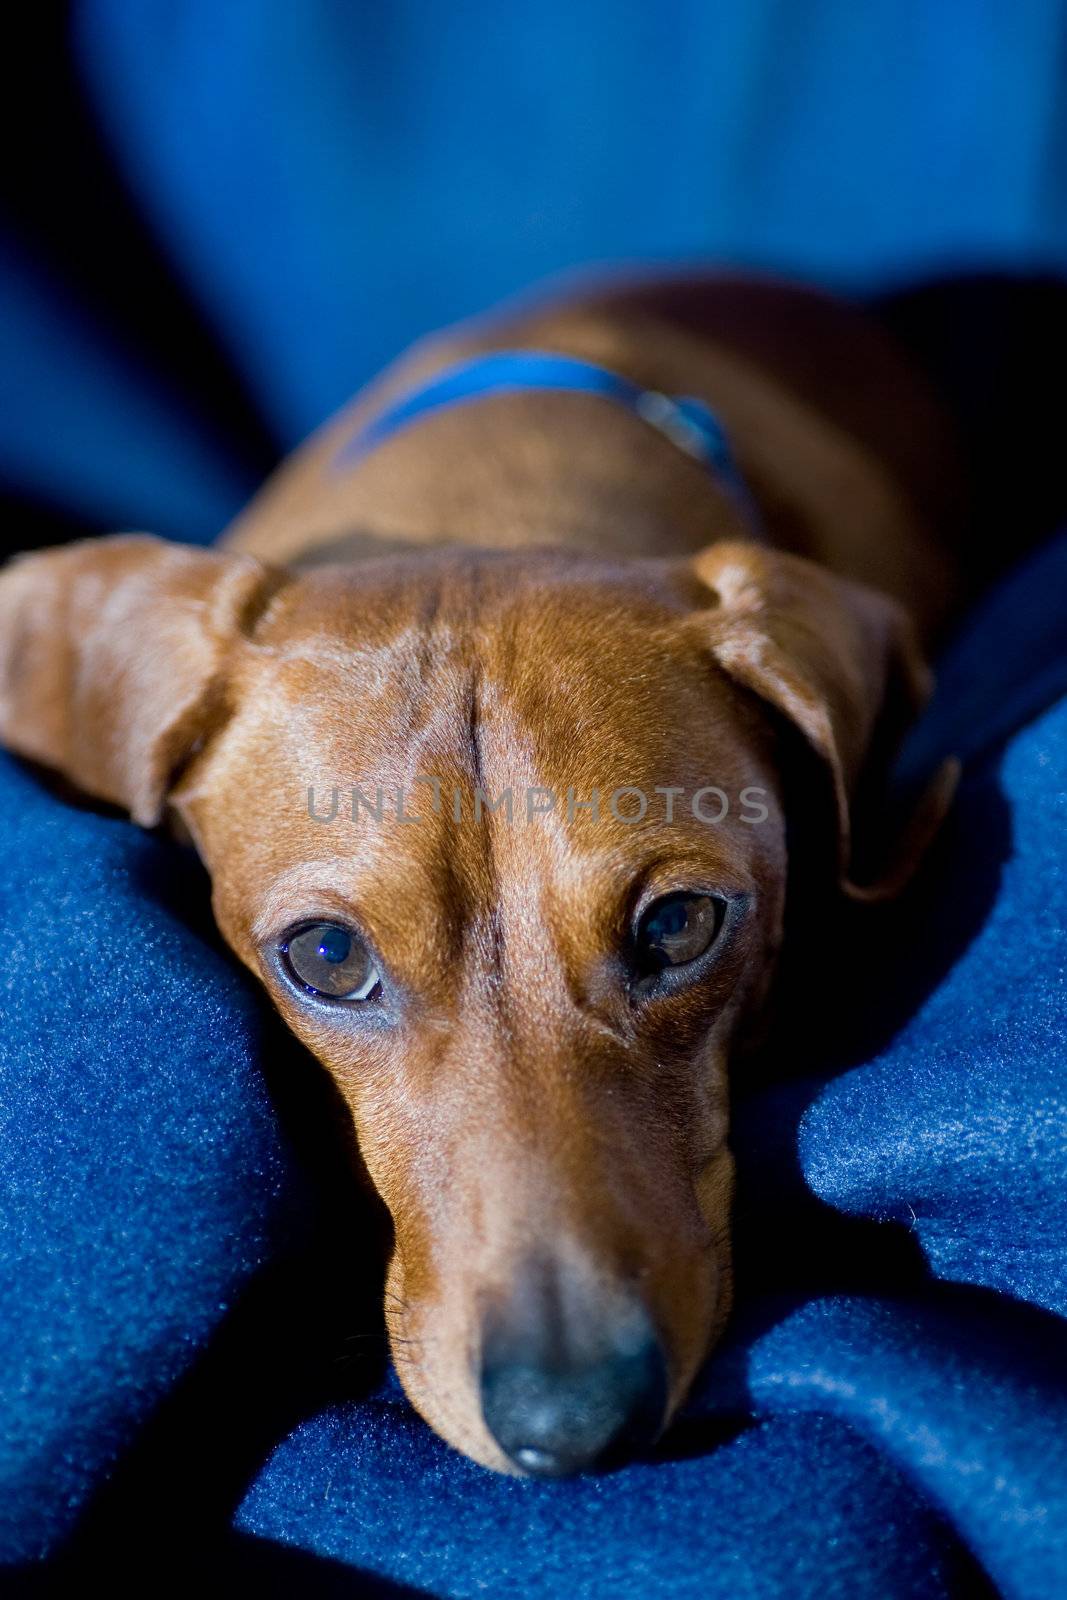 A relaxed dachshund laying on a blue blanket, looking up at the camera.